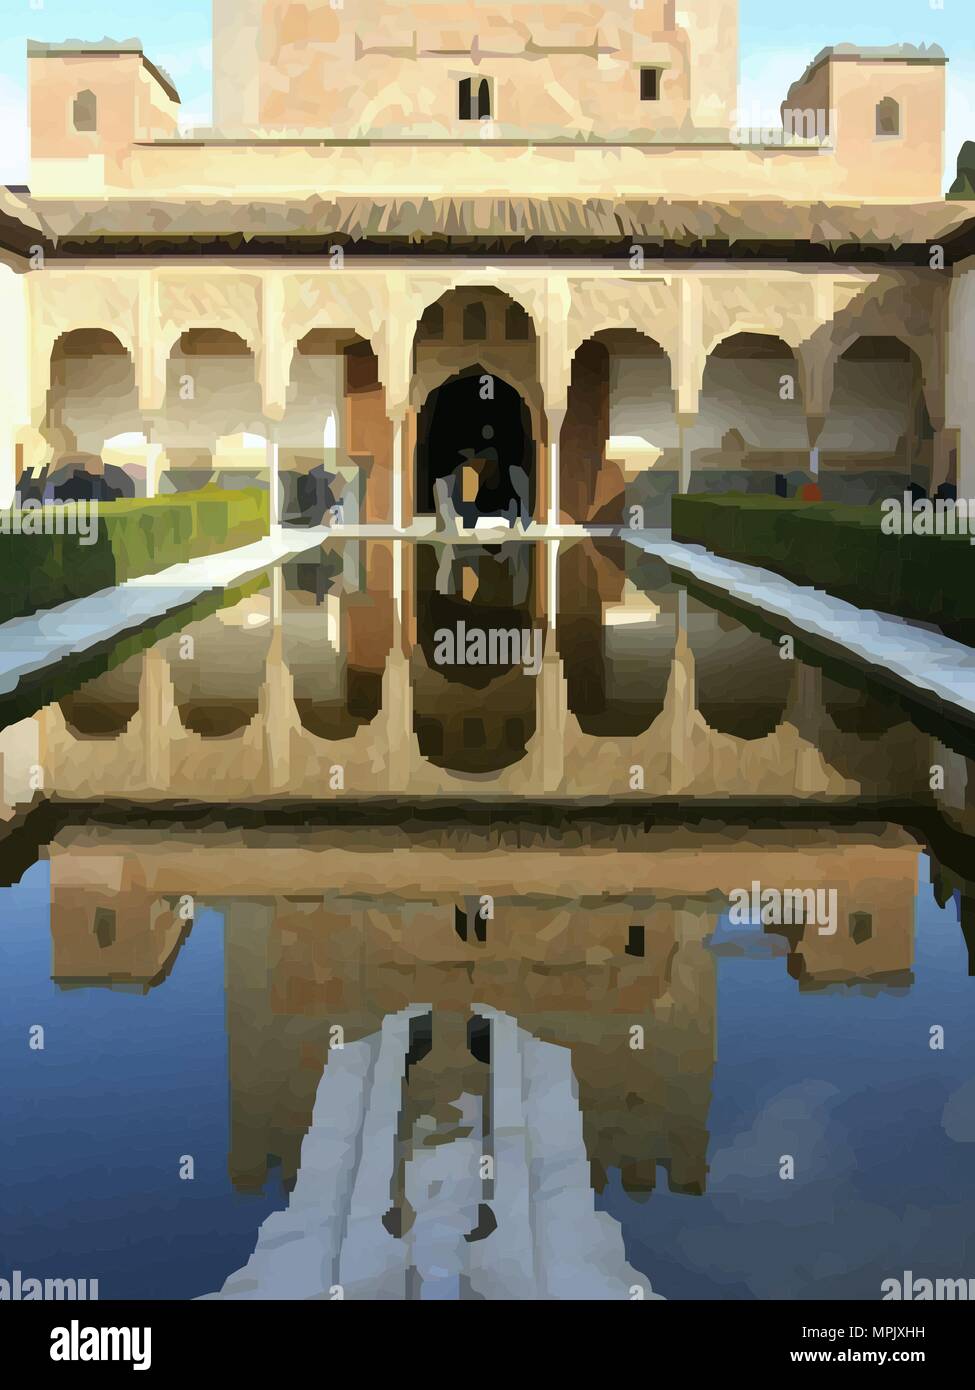 Alhambra Palace, Granada, Andalusia, Spain. Stock Vector